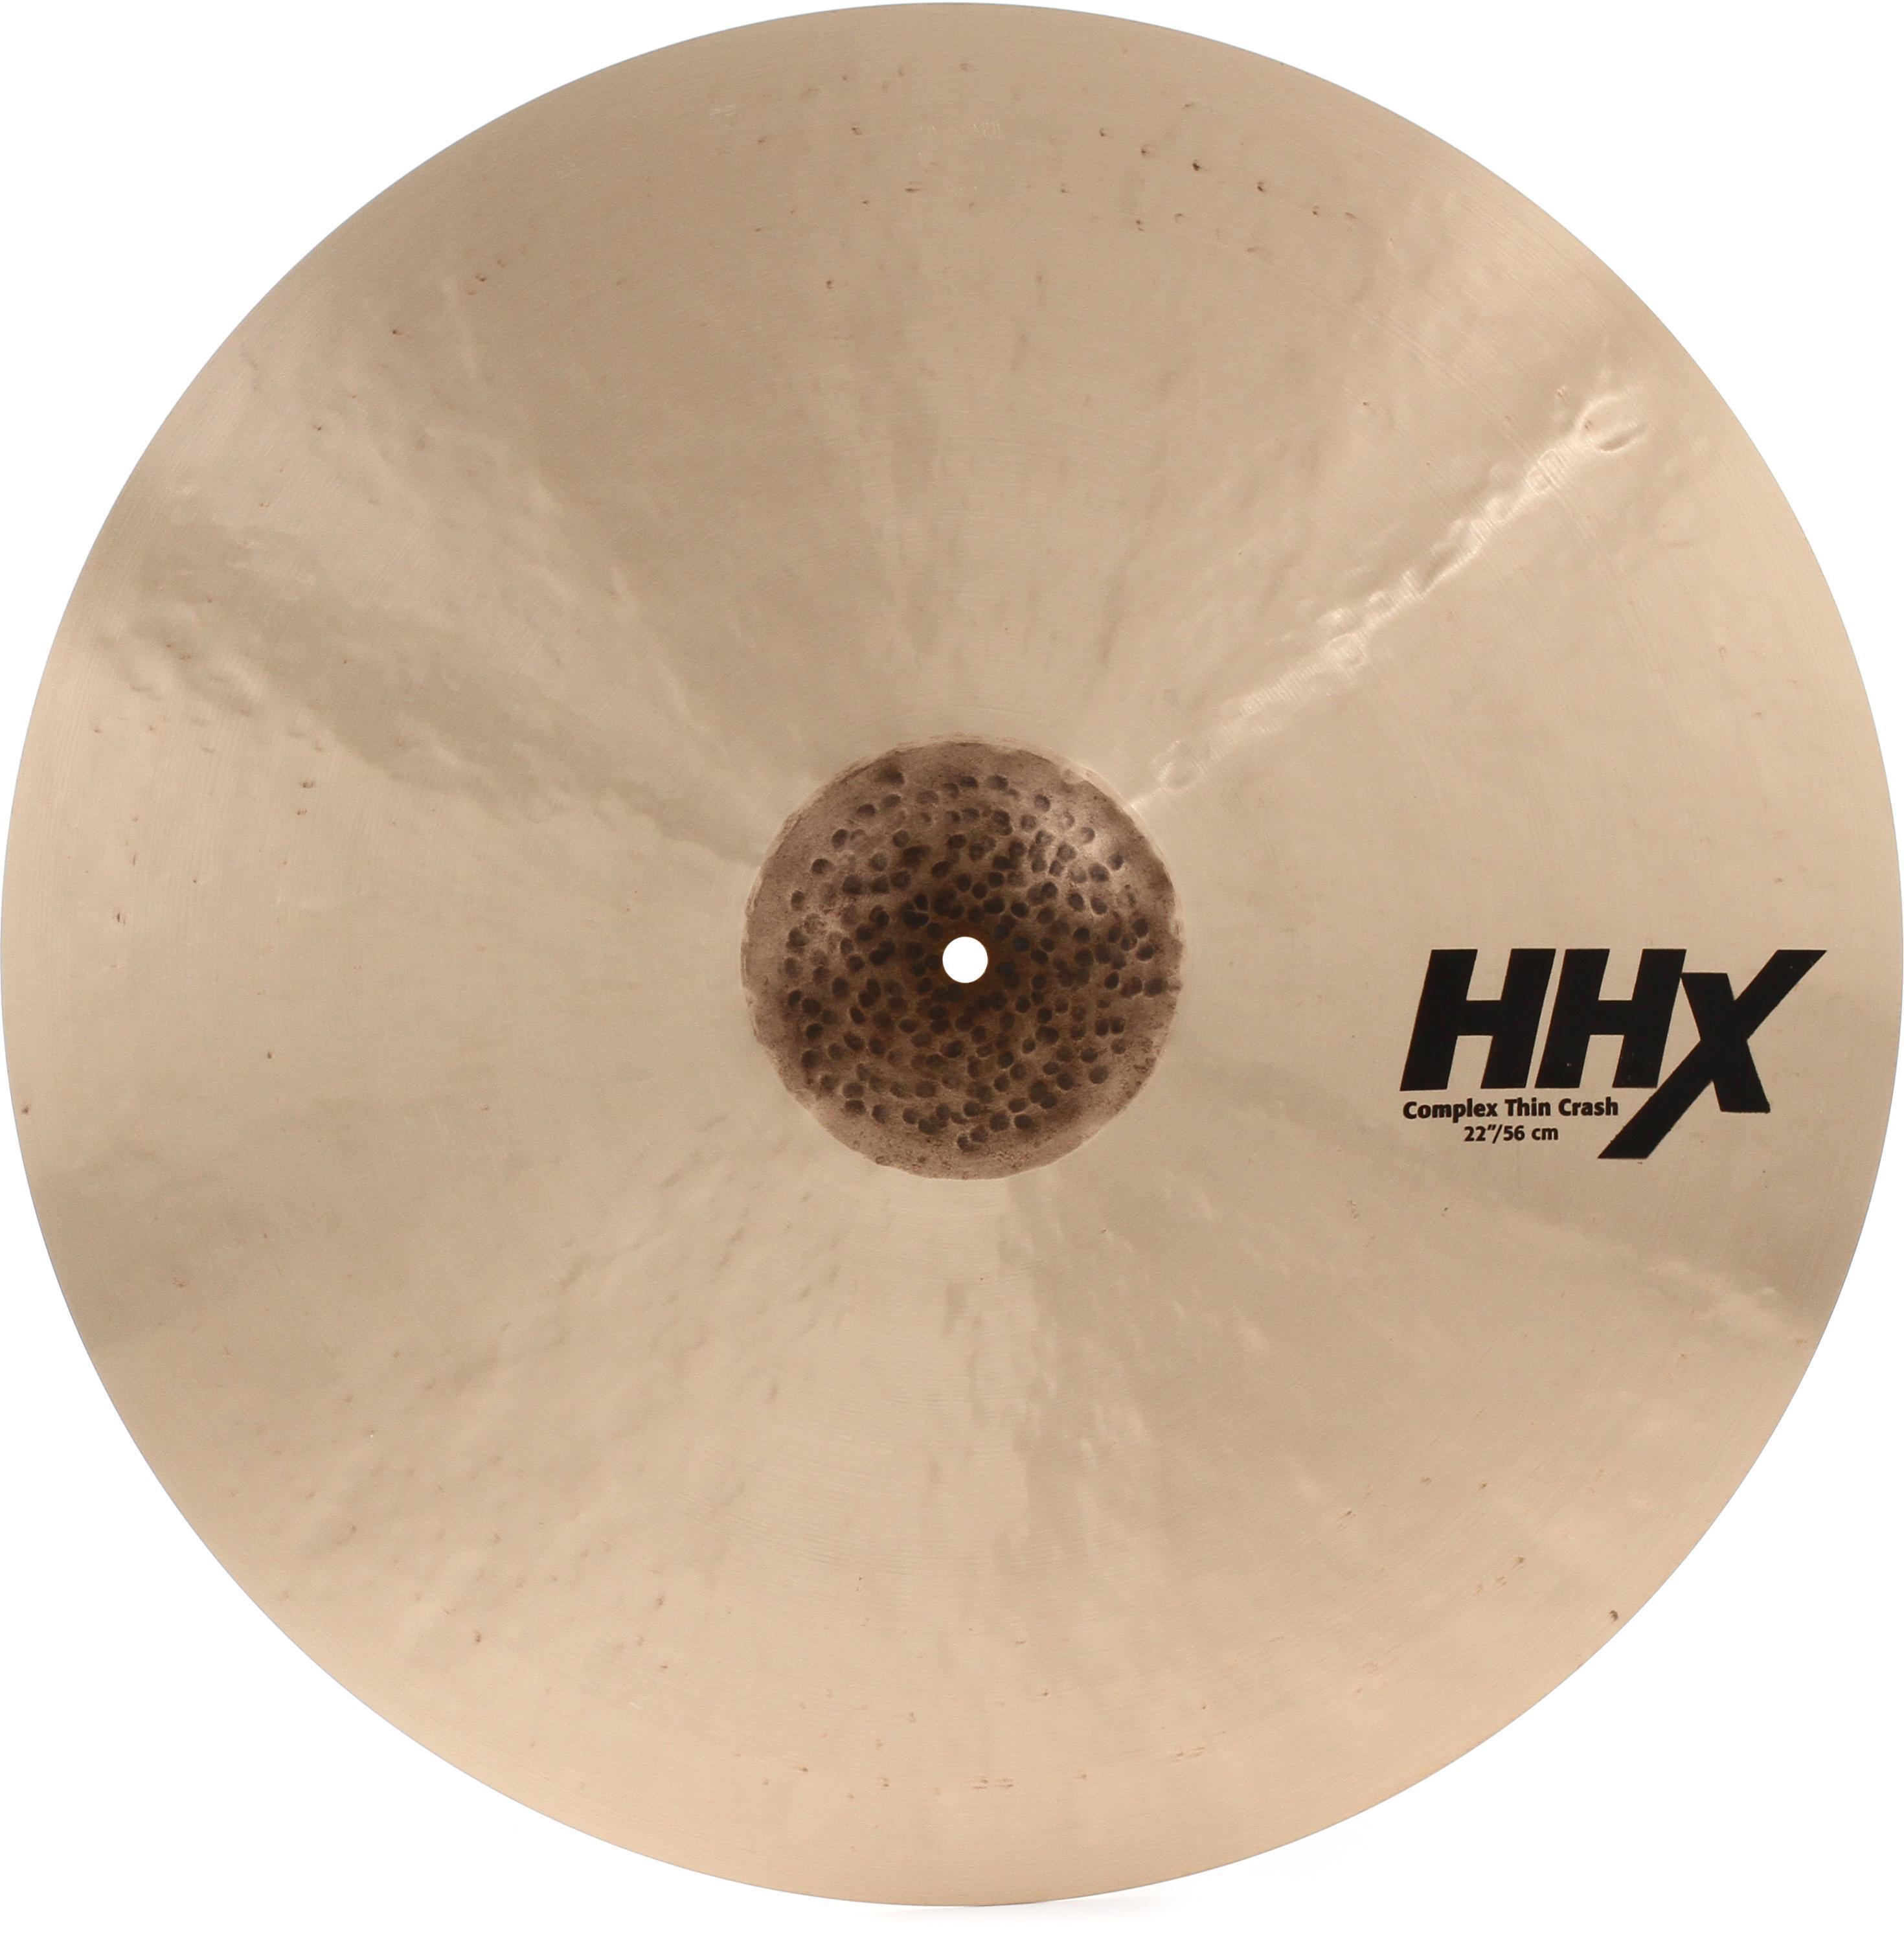 Sabian 22 inch HHX Complex Thin Crash Cymbal | Sweetwater